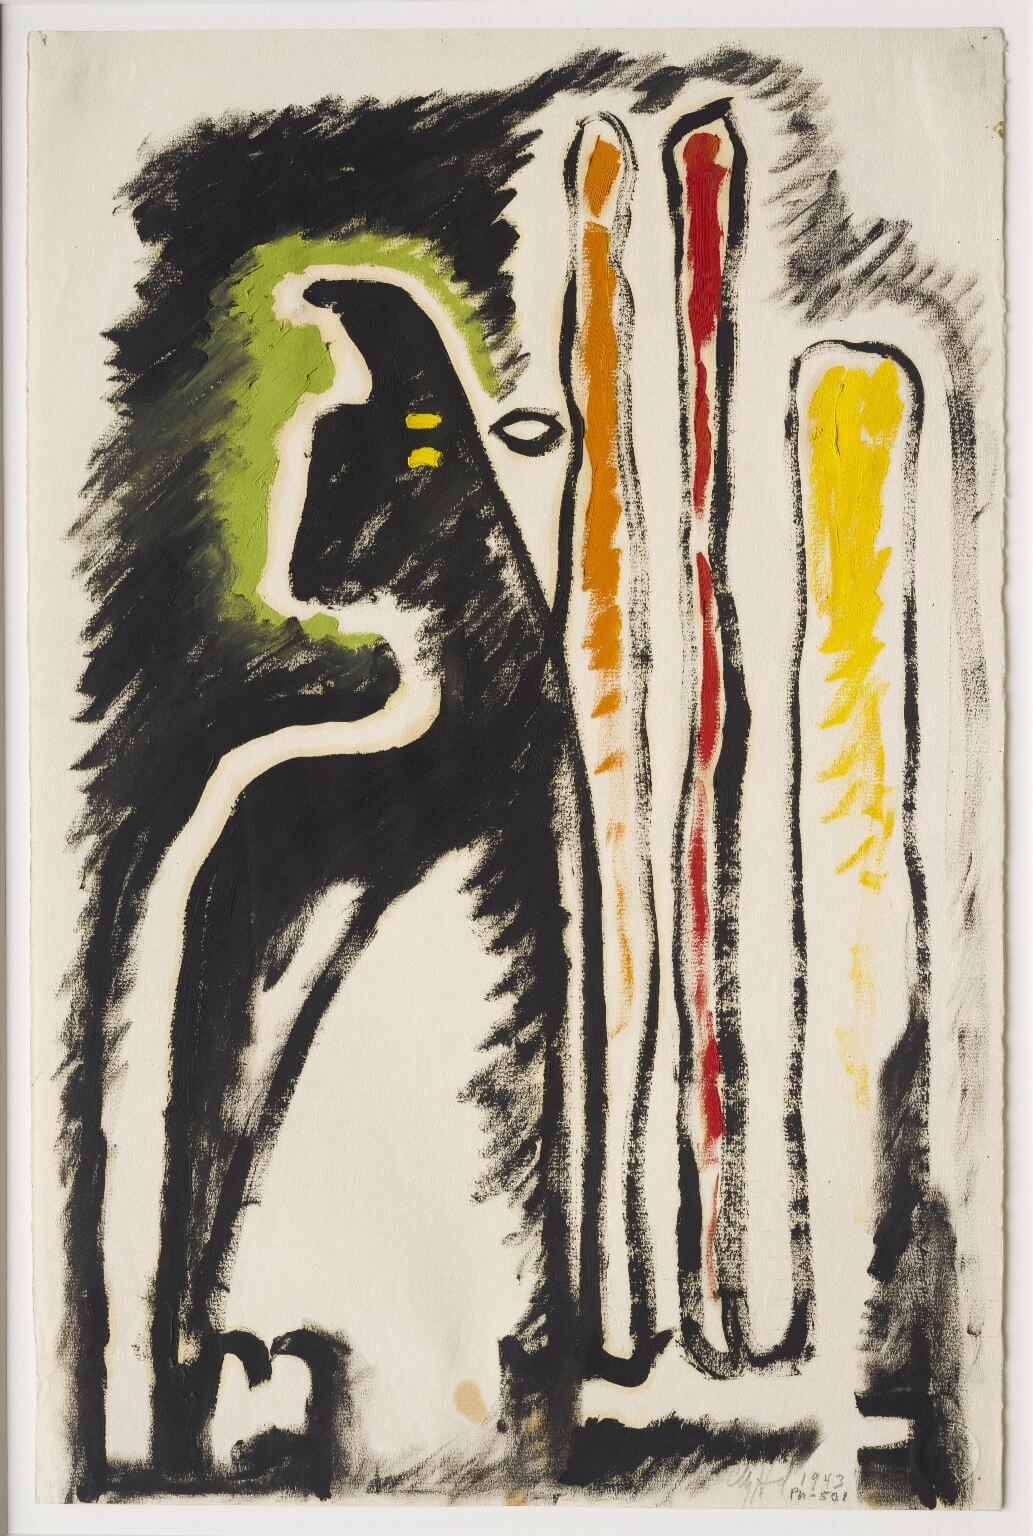 Abstract oil painting on paper with a large black figure looking left highlighted in green and thin outlined figures in orange, red, and yellow next to it